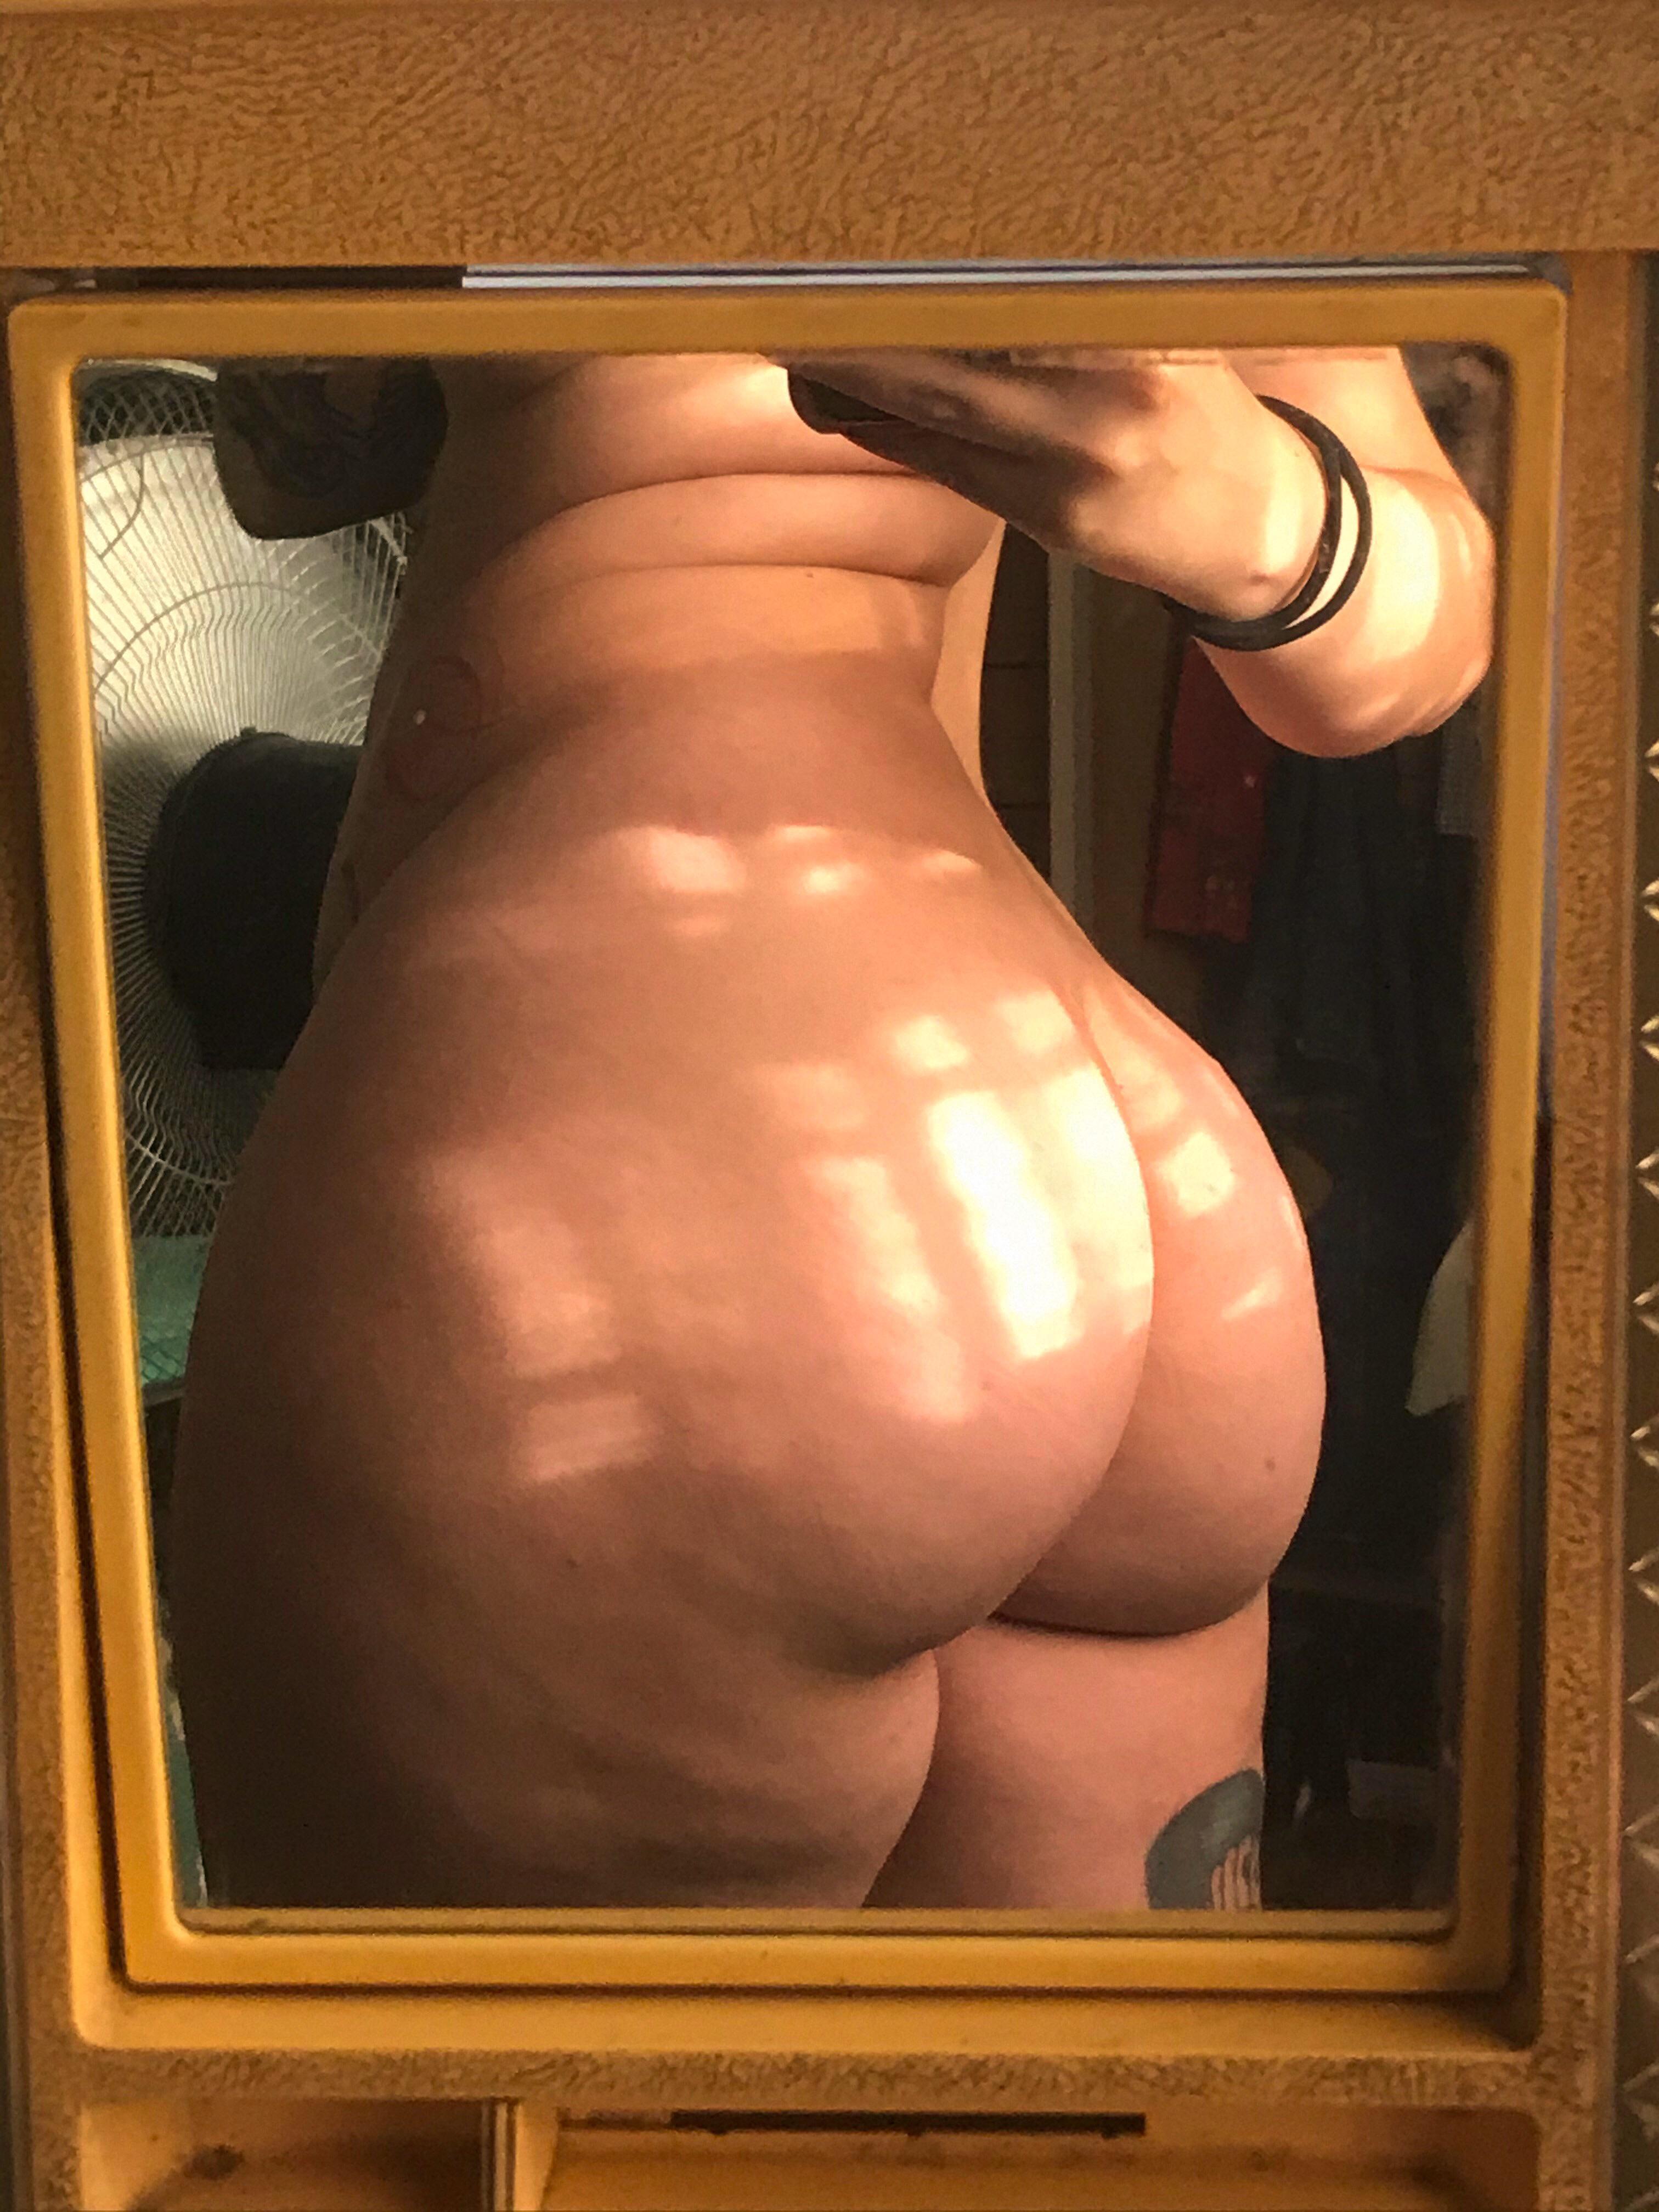 PAWG This is the right way to start the day